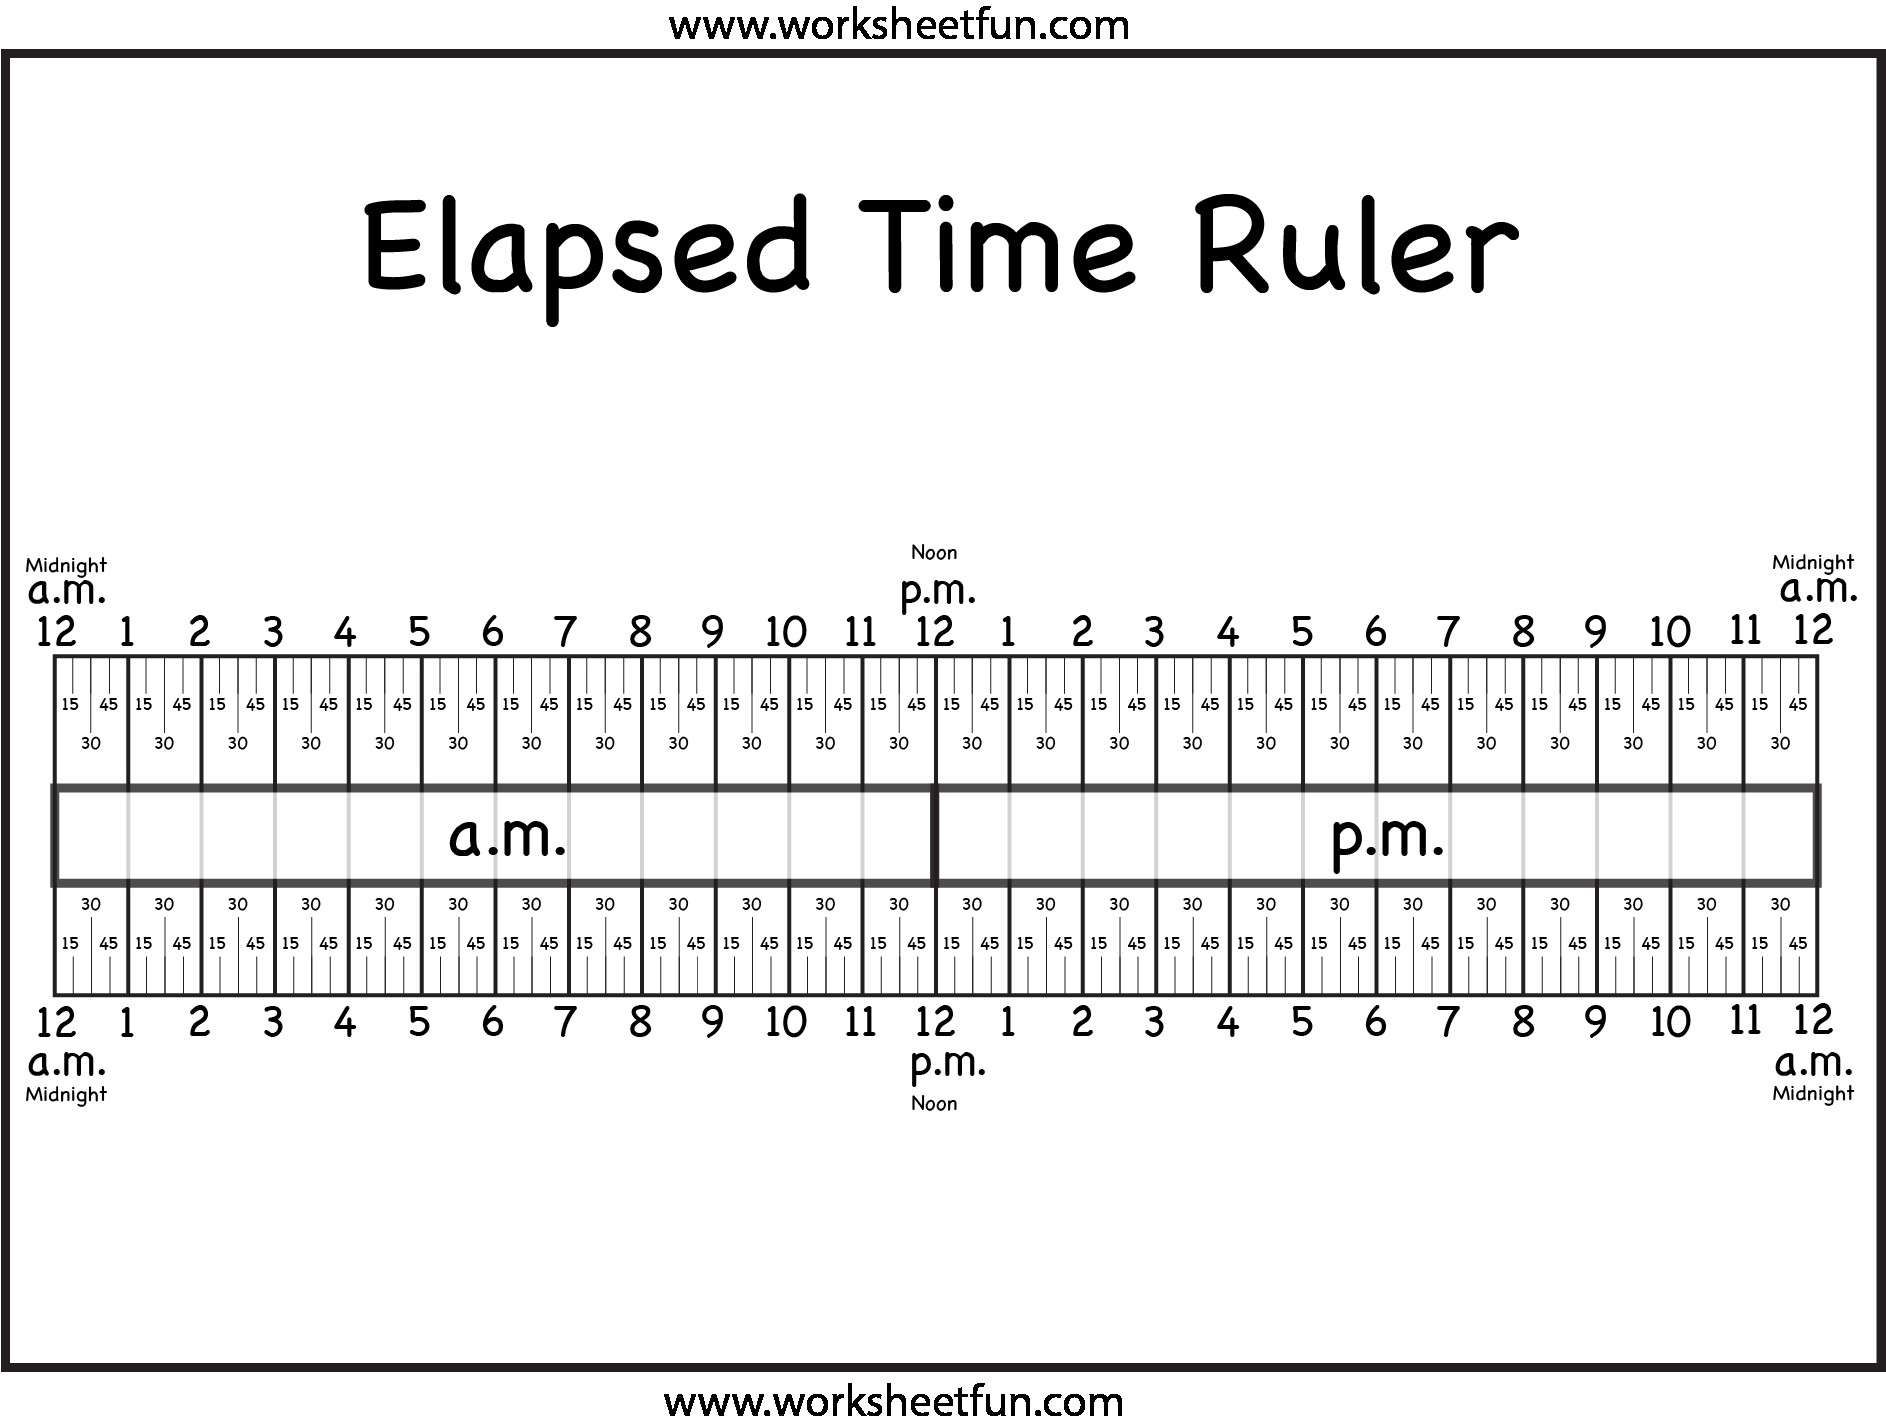 Elapsed Time Ruler – 0 15 30 45 60 minutes